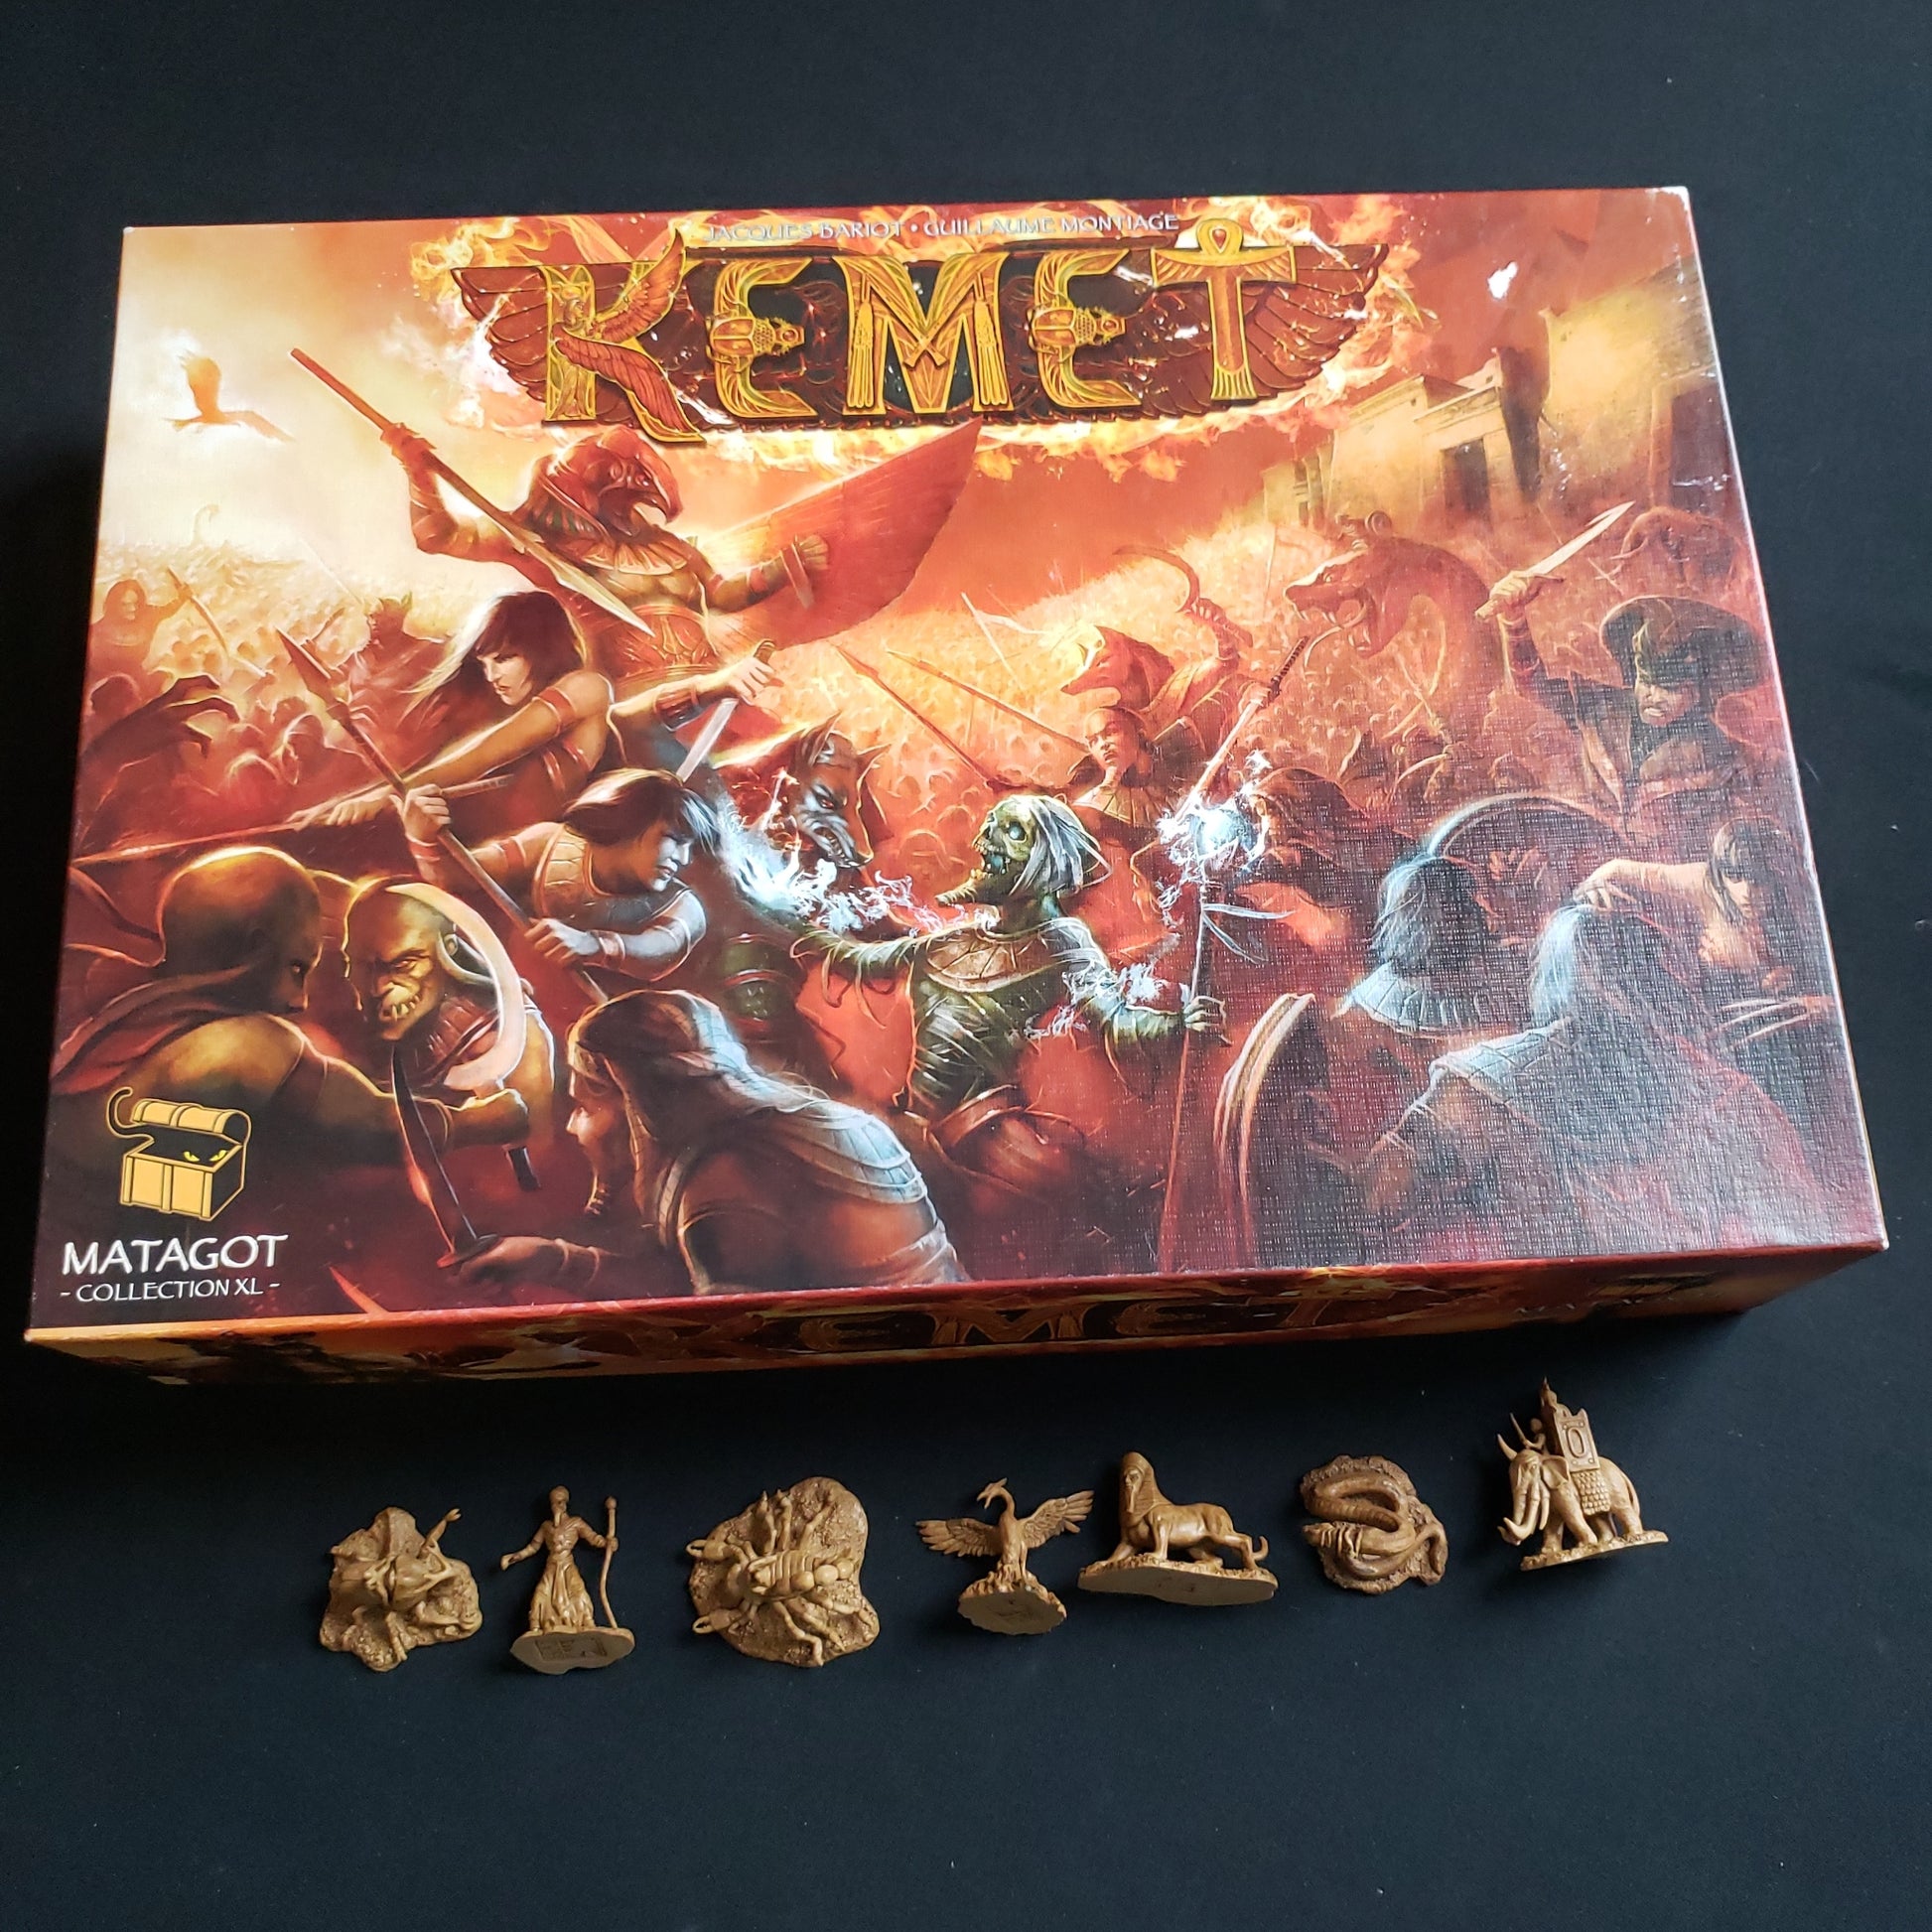 Image shows the front cover of the box of the Kemet board game, with the Creature miniatures underneath it